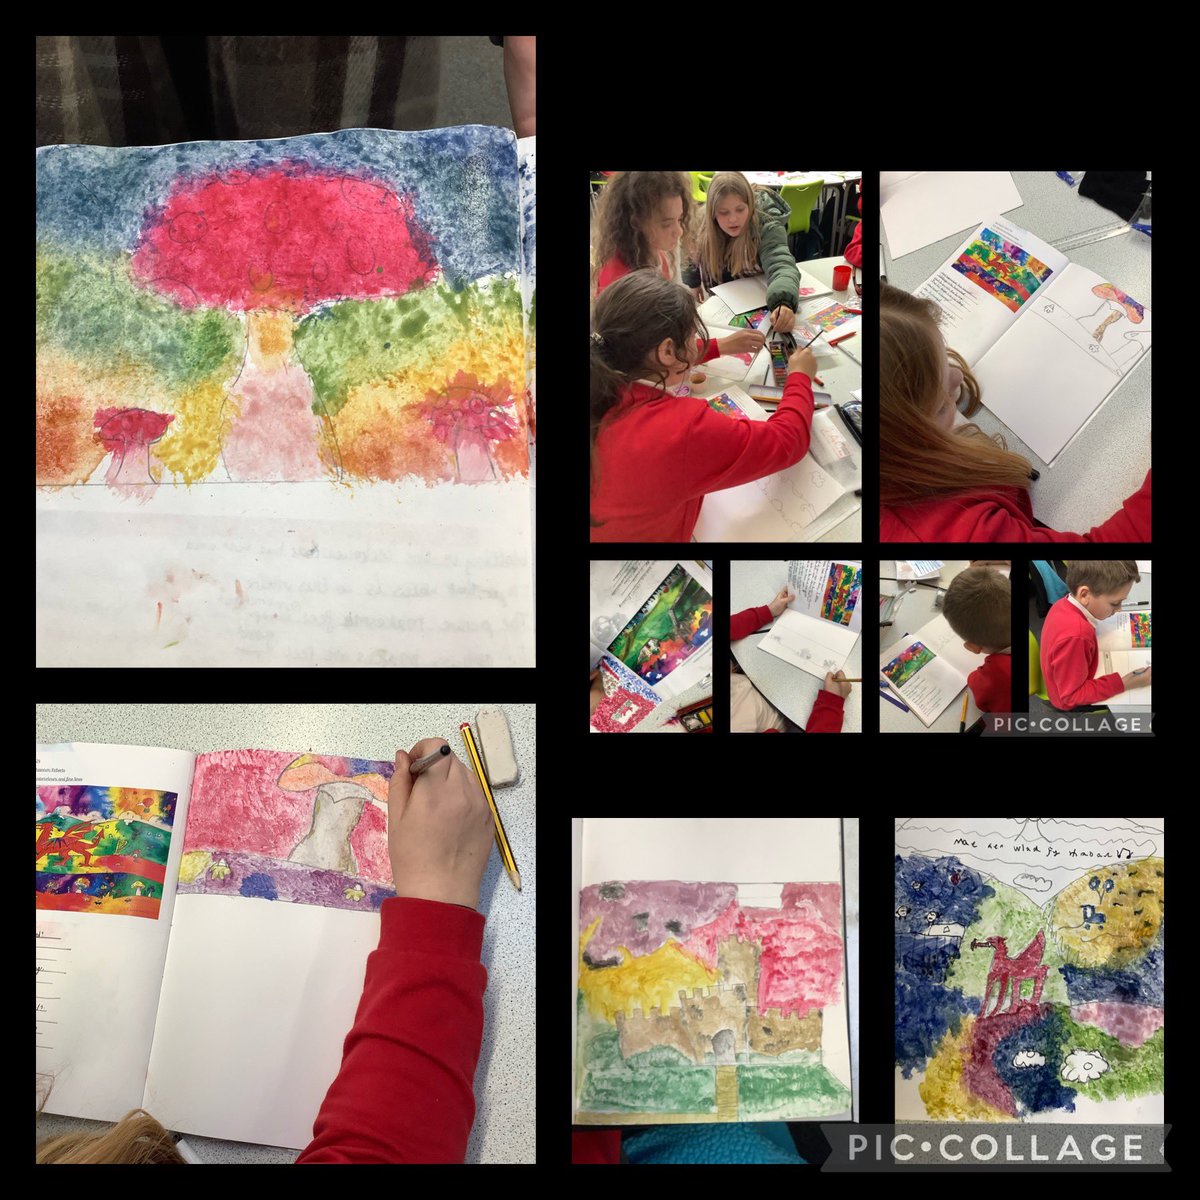 This afternoon Dosbarth 12 have been exploring the Welsh artist Rhiannon Roberts and her technique of blotting. They have used this technique to recreate a snap shot of the artists work @MrsHLeeY56 @garntegprimary we are creative contributors in year 6🤩